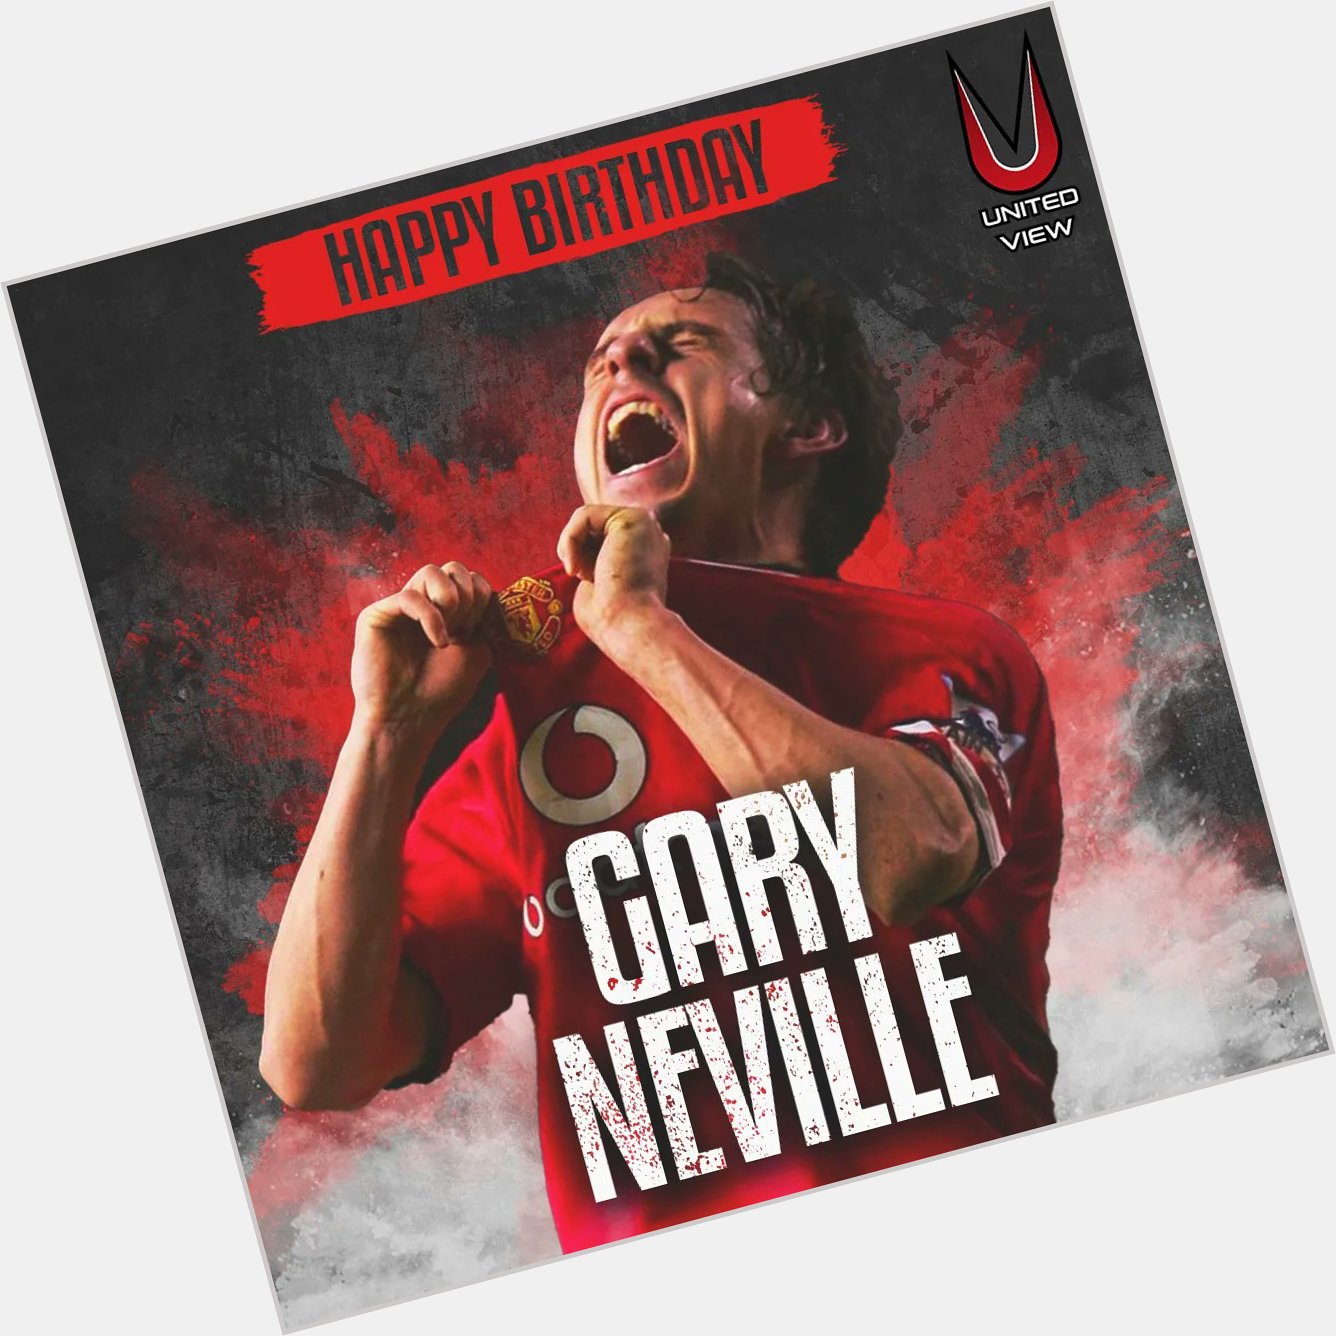 Happy Birthday to Gary Neville!  The former Manchester United captain turns 47 years old today. 